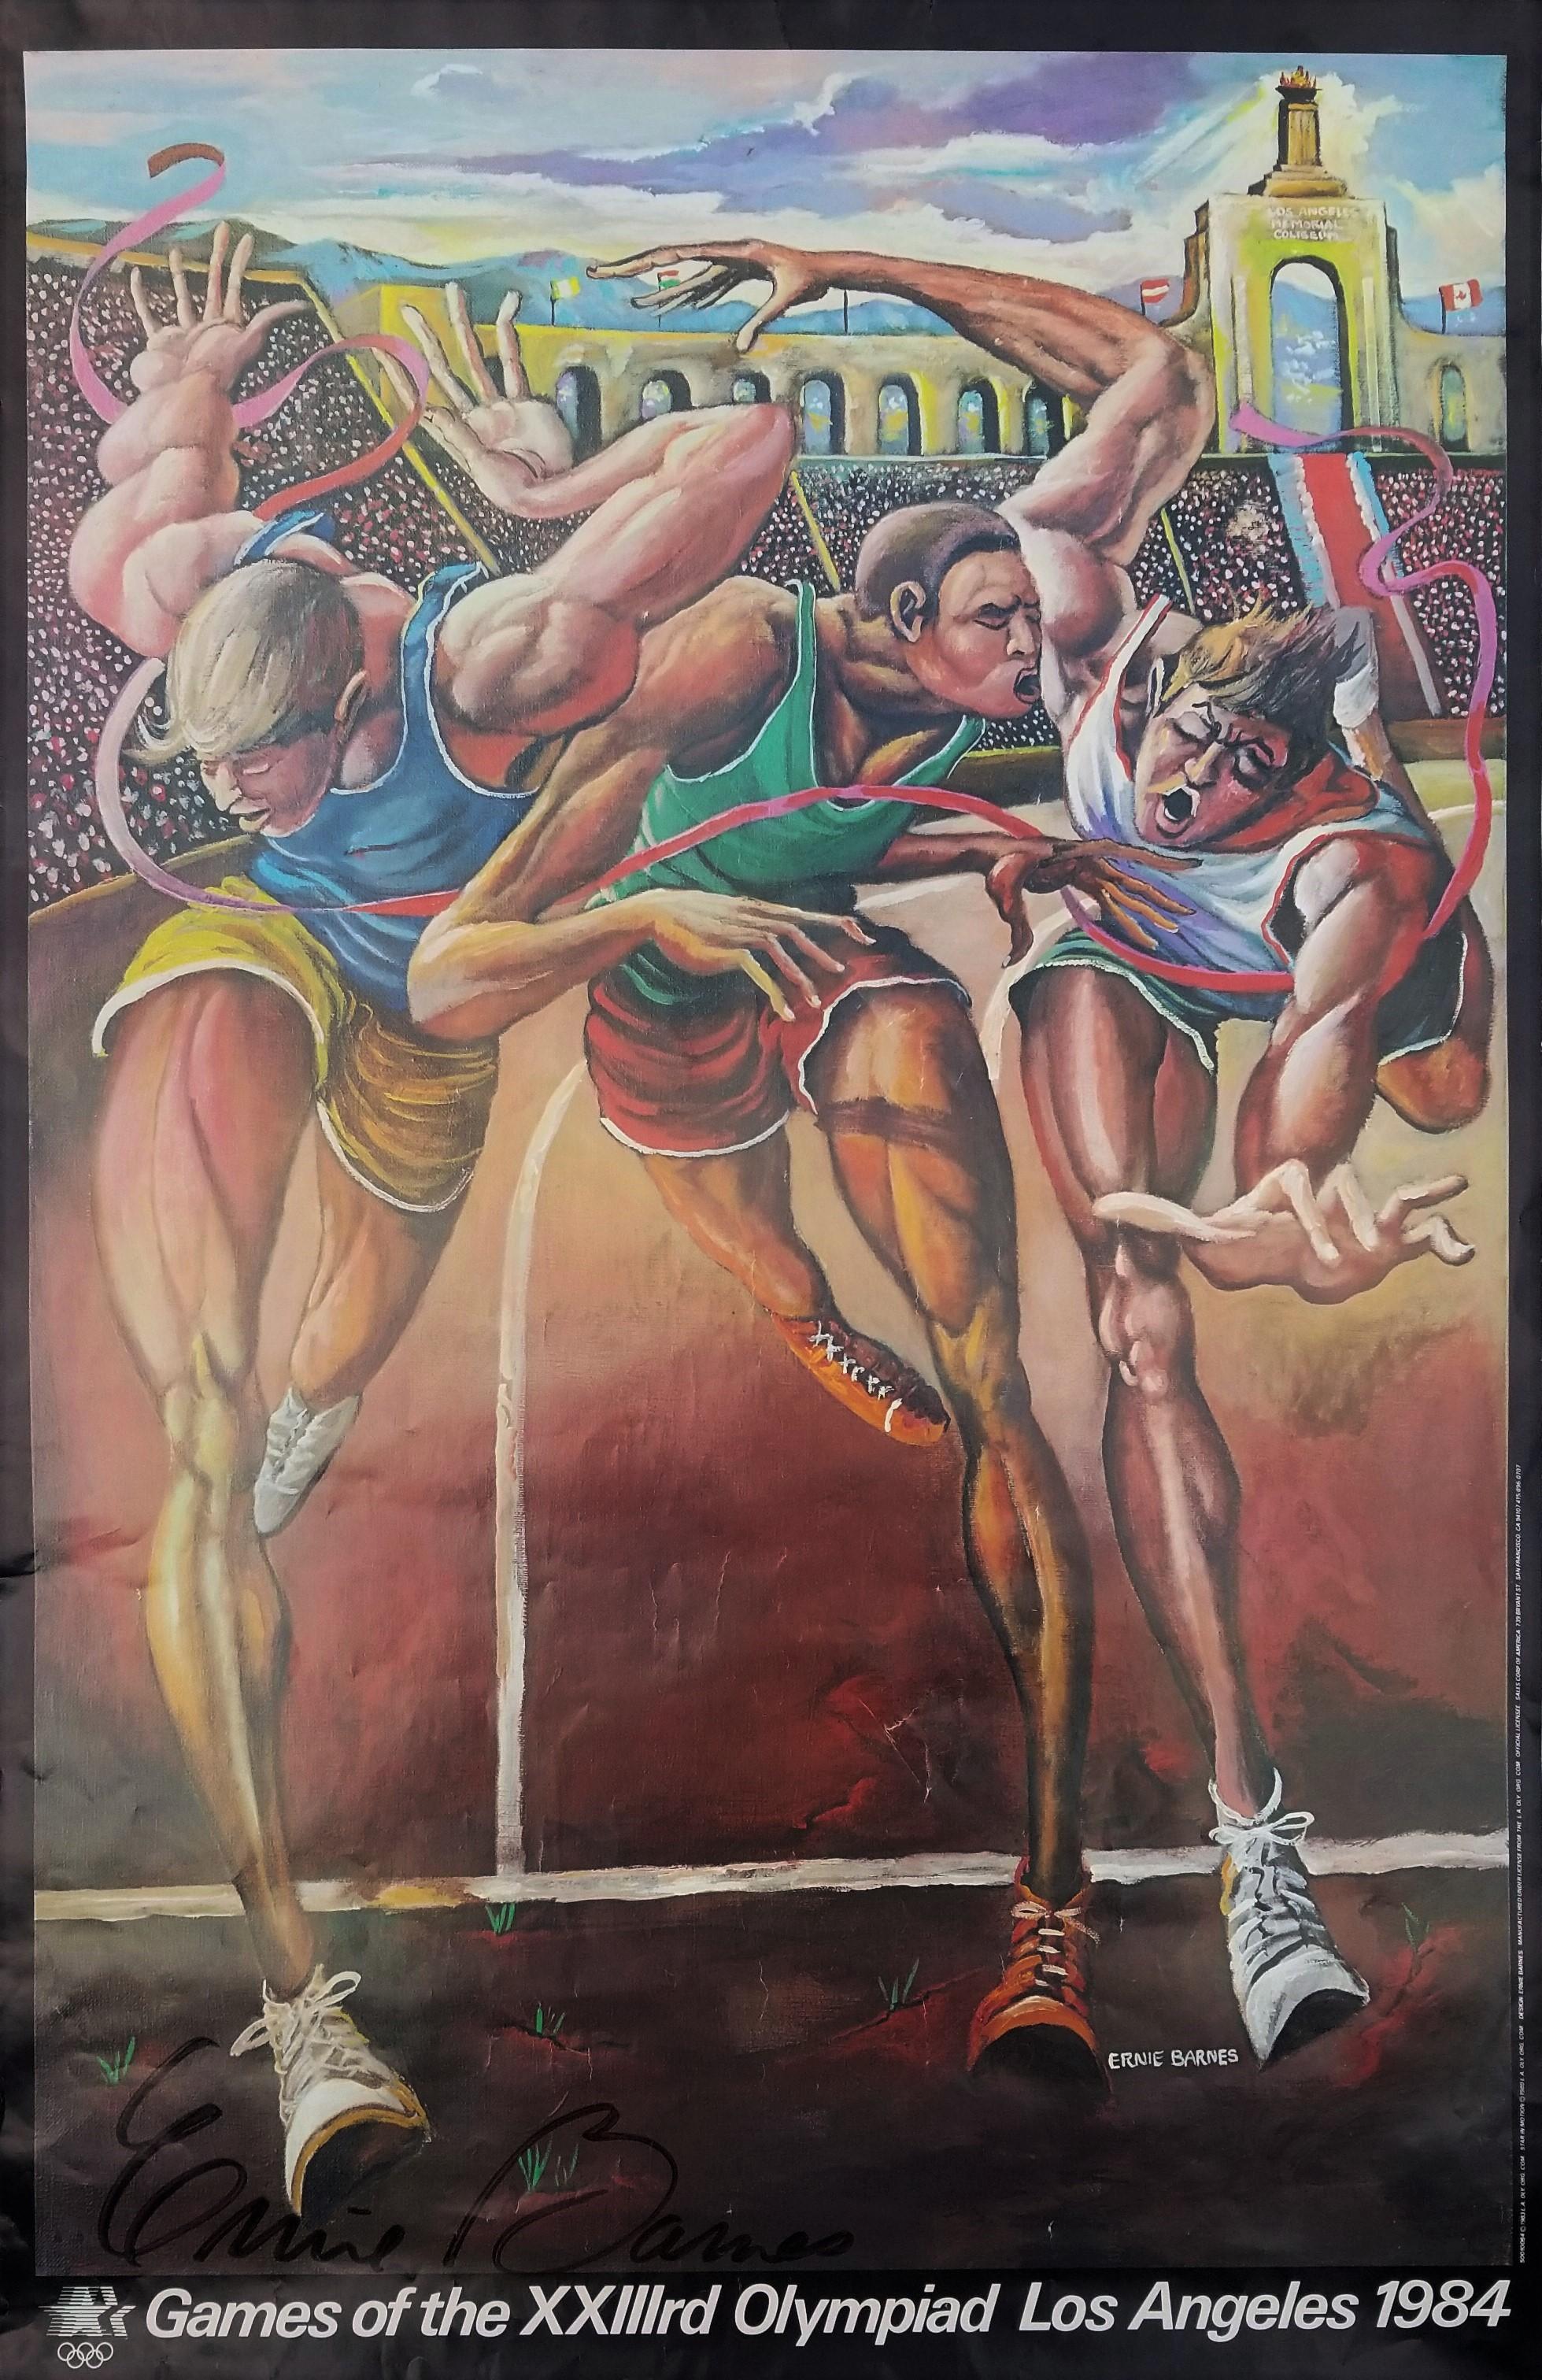 Ernie Barnes Figurative Print - Los Angeles 1984 Olympic Games (The Finish) Poster (Signed) /// Black Art Sports